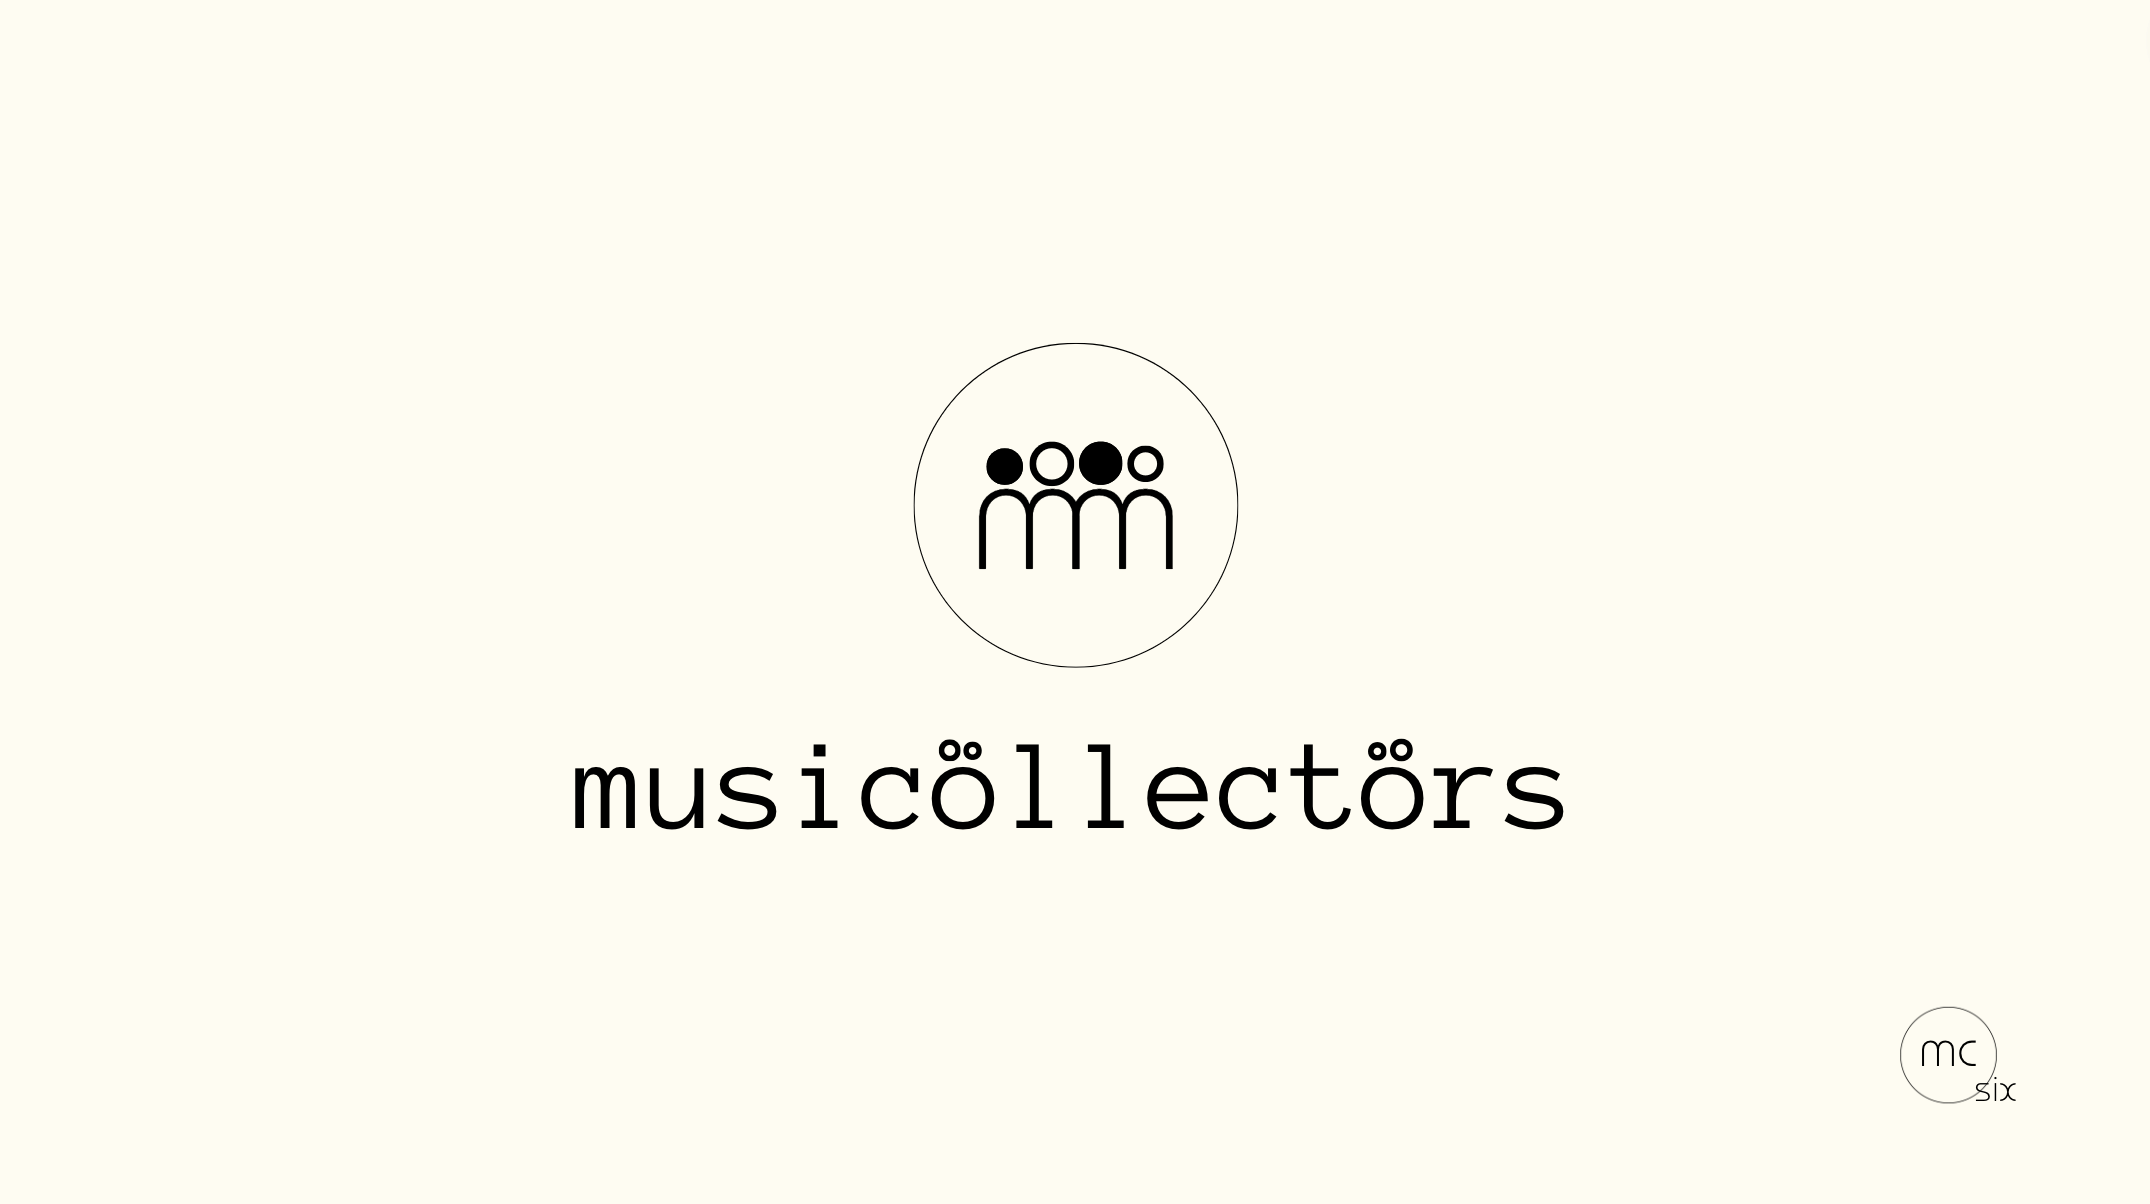 introducing the musicöllectörs rating, gathering crowd wisdom from informed collectors